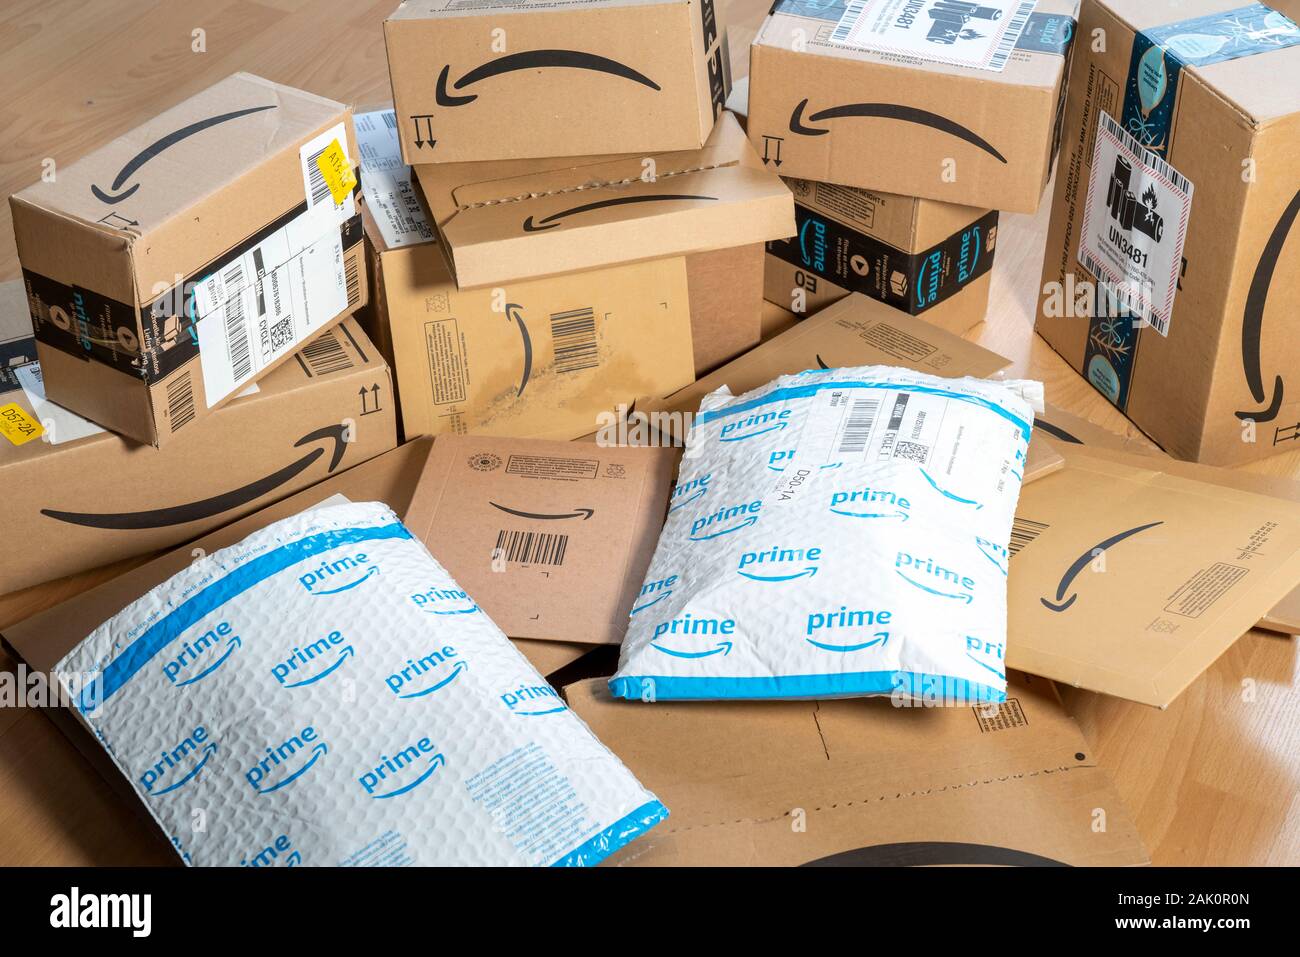 Packages from online mail order company Amazon, various packaging, Amazon  Prime Stock Photo - Alamy